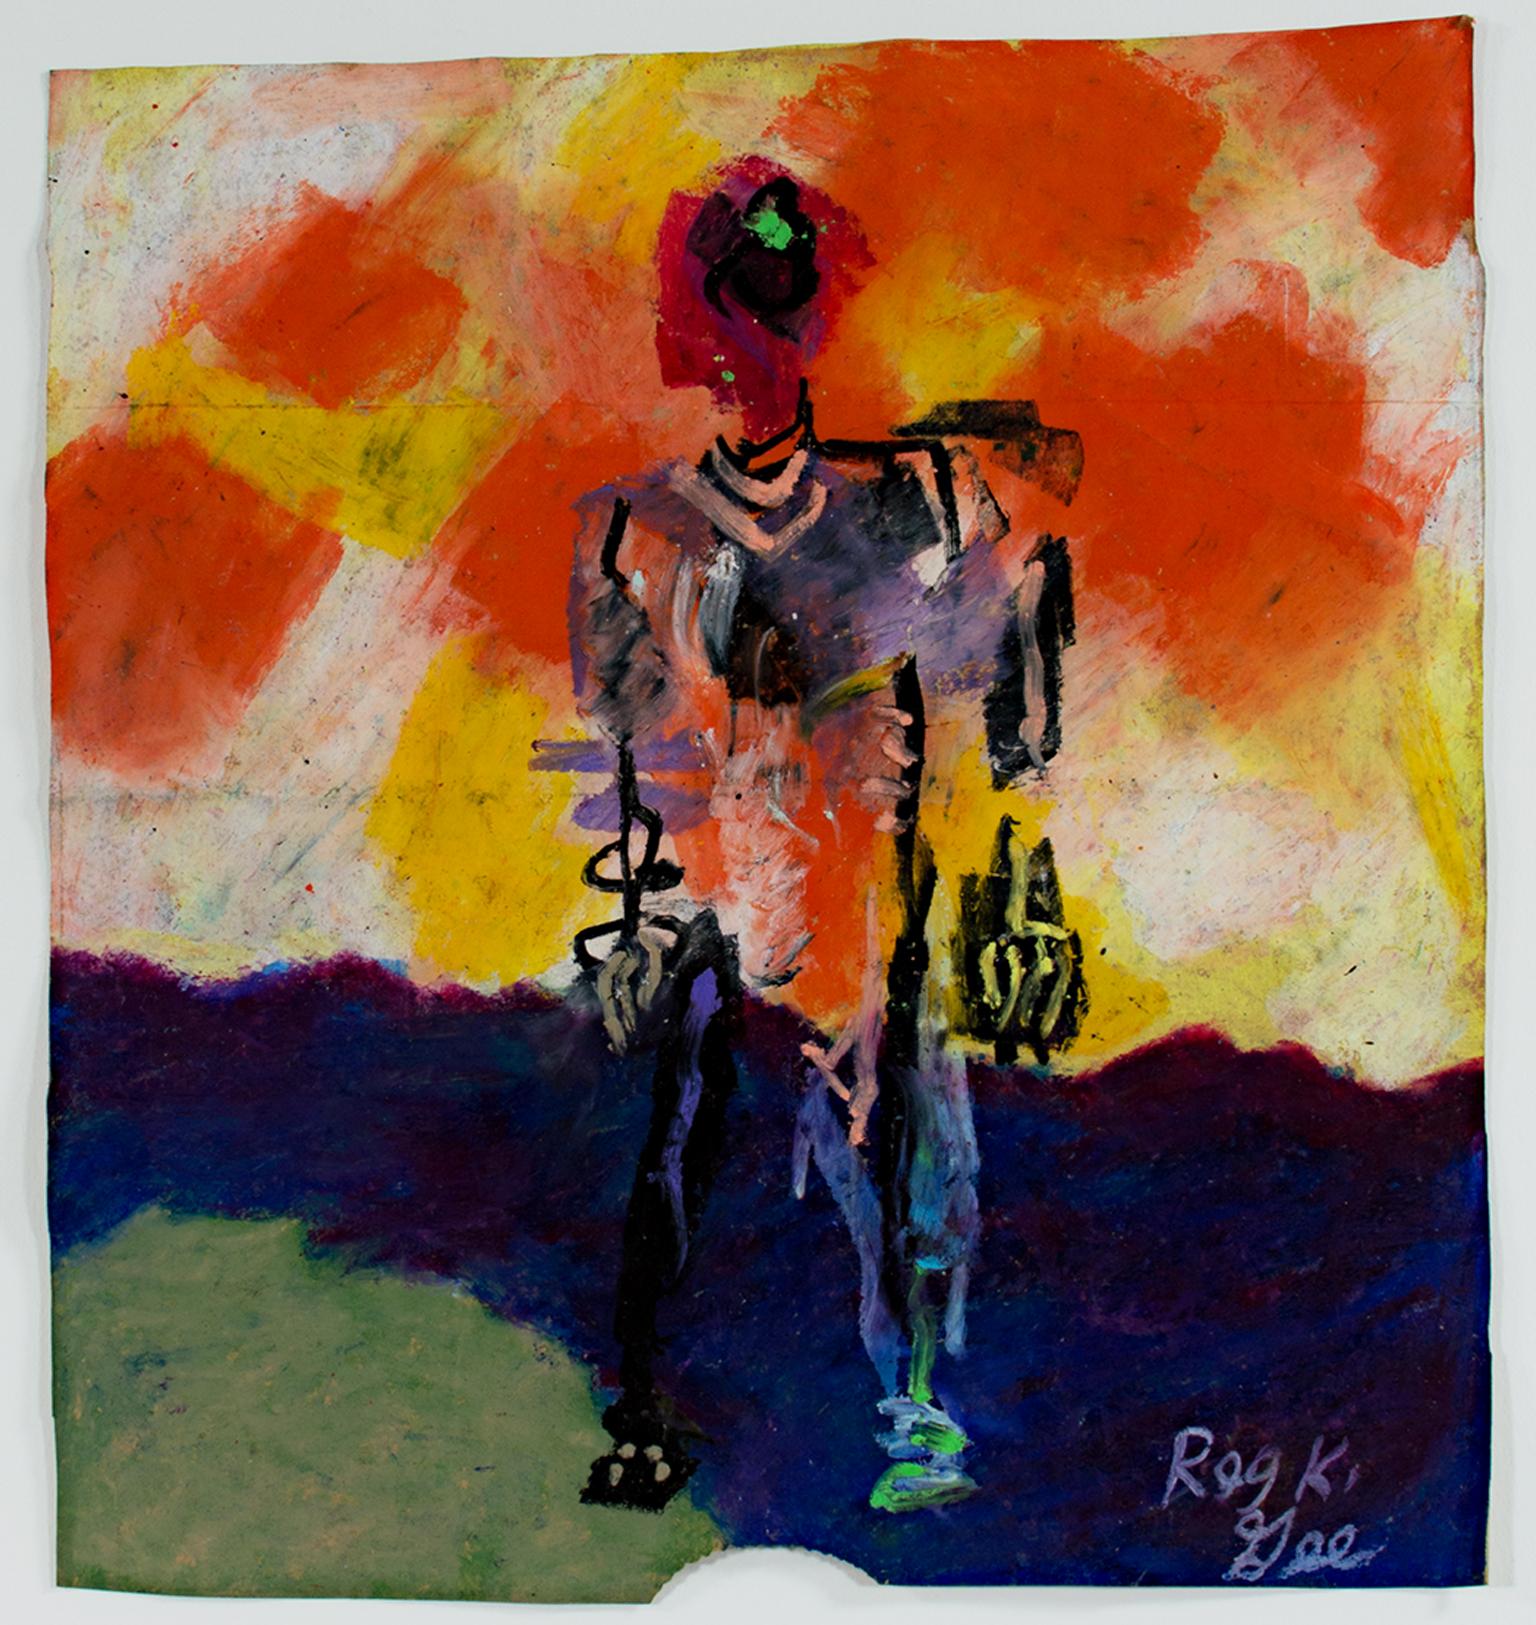 "Remembering" is an original oil pastel drawing on a grocery bag by Reginald K. Gee. The artist signed the piece lower right. It features an abstracted, skeleton-like man in front of a brightly-colored sky in orange and yellow. 

13 1/2" x 12"